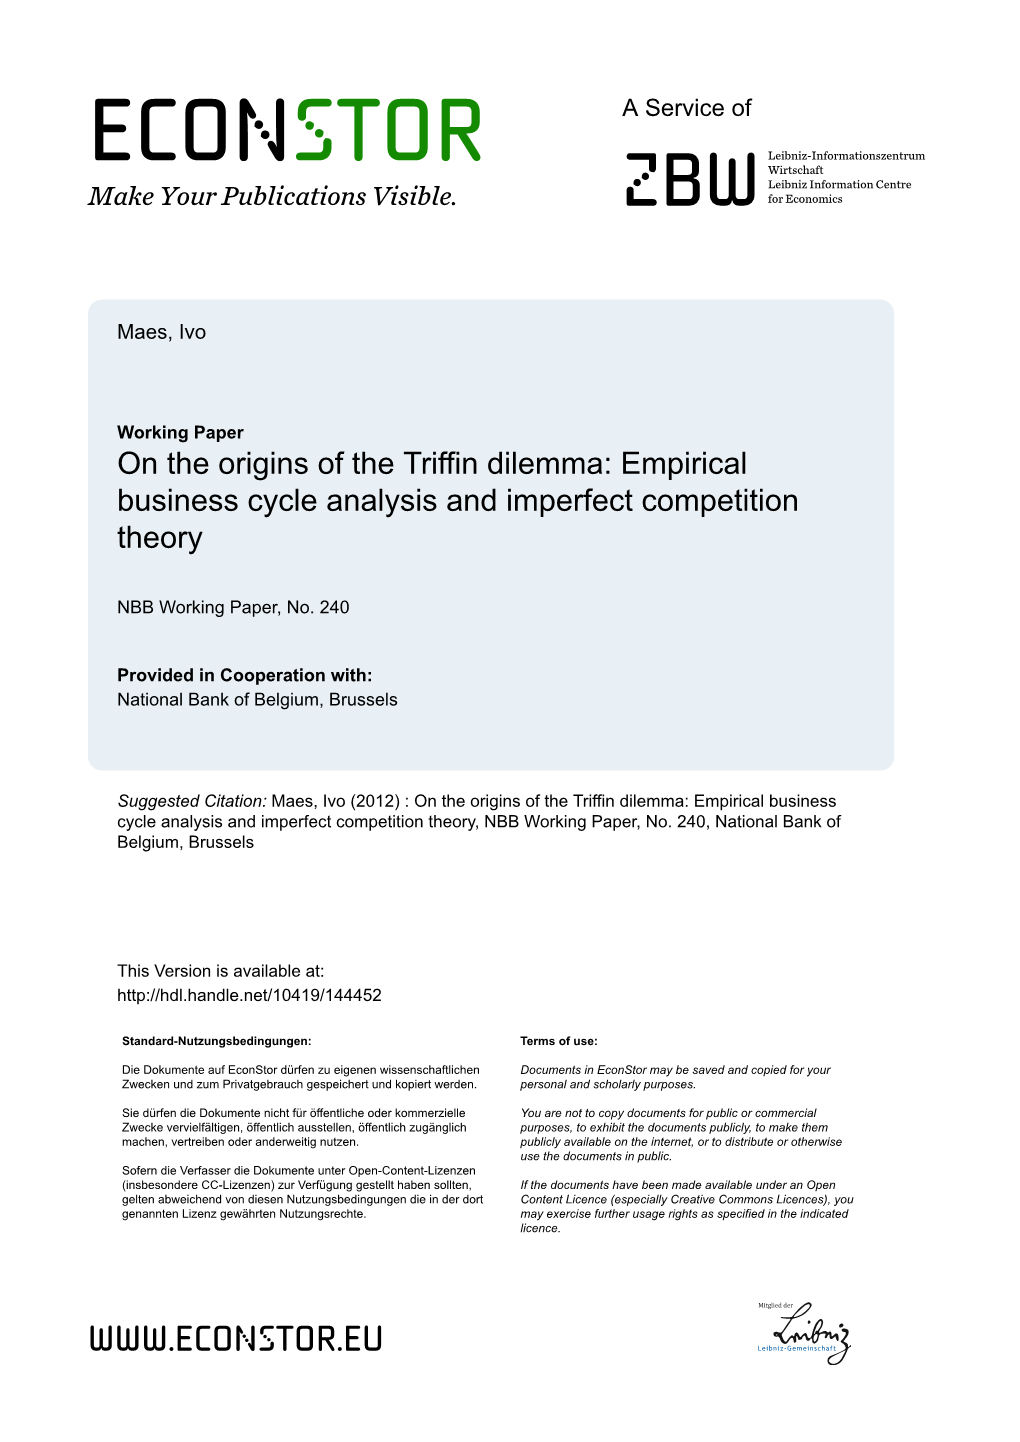 On the Origins of the Triffin Dilemma: Empirical Business Cycle Analysis and Imperfect Competition Theory